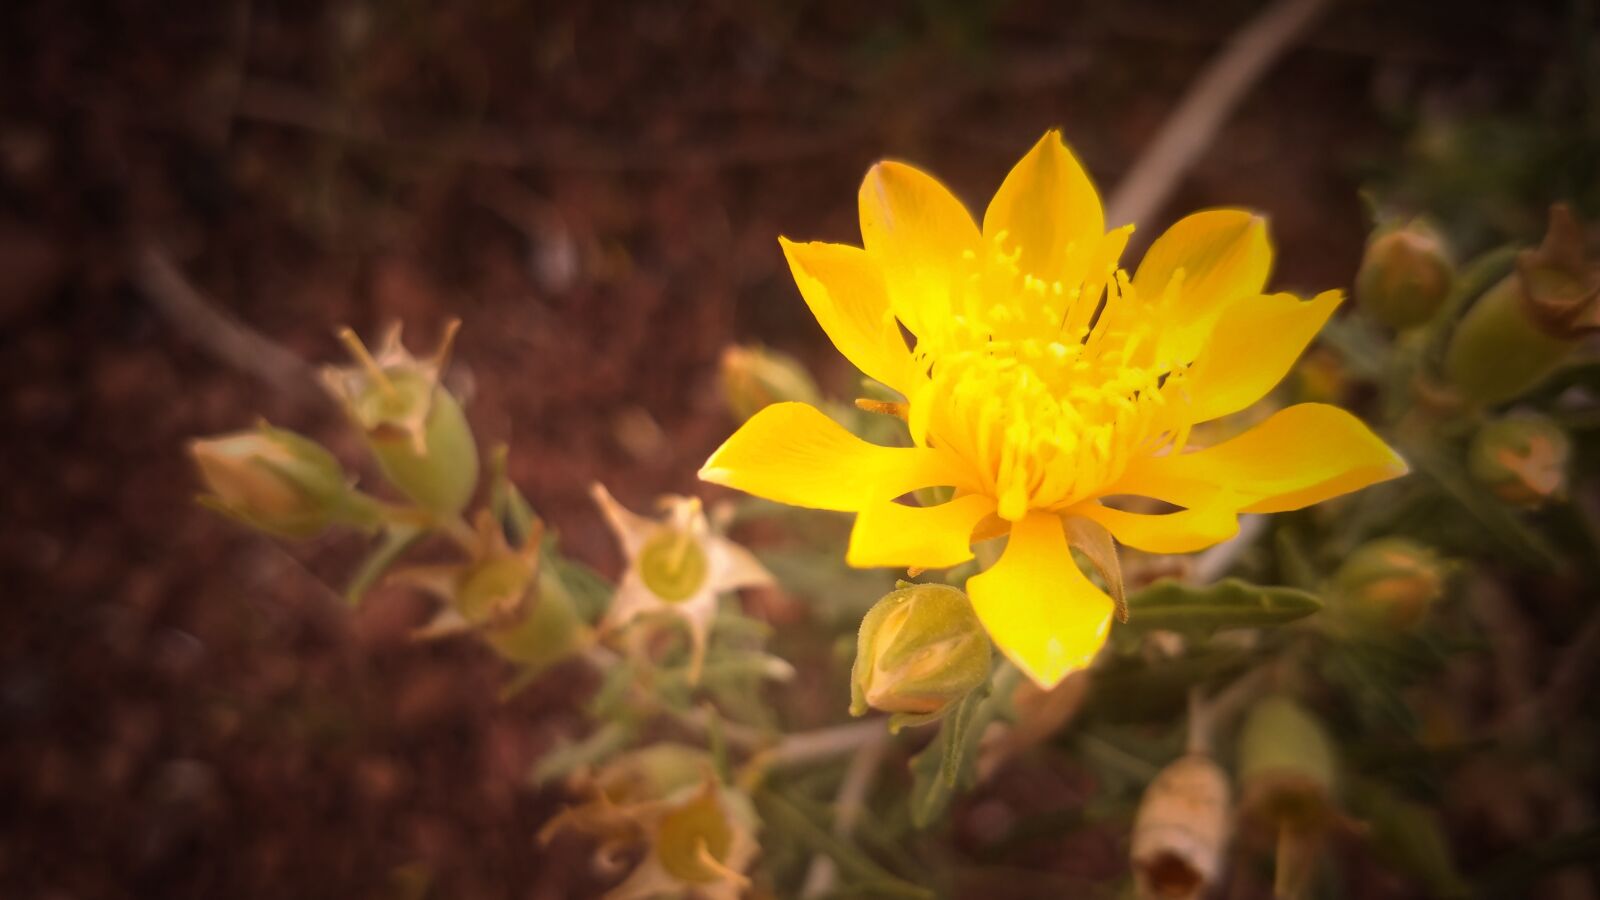 Samsung Galaxy S7 sample photo. Flower, yellow, outdoors photography